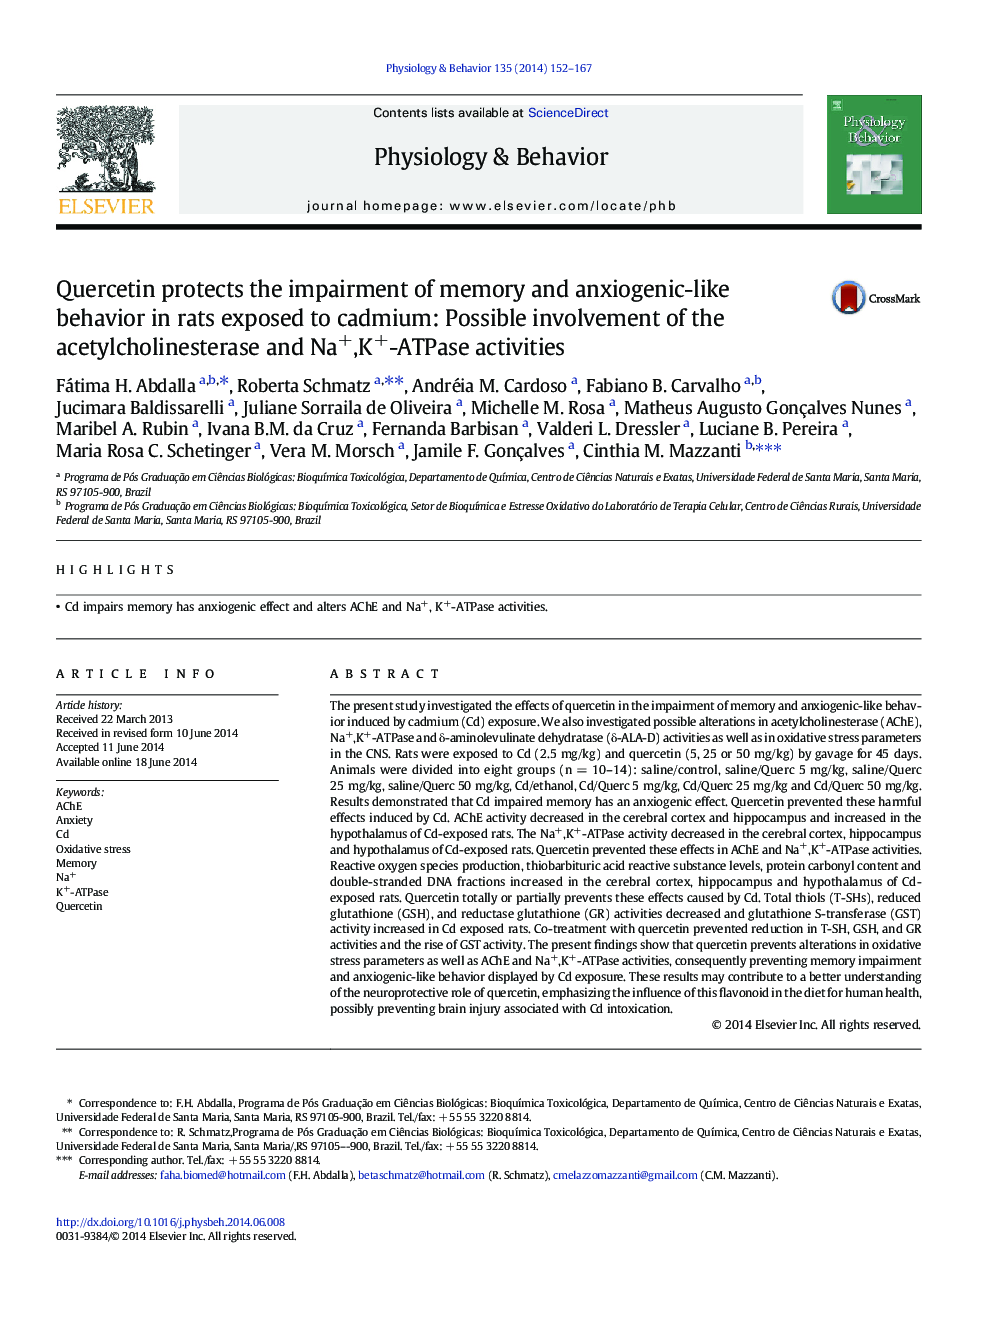 Quercetin protects the impairment of memory and anxiogenic-like behavior in rats exposed to cadmium: Possible involvement of the acetylcholinesterase and Na+,K+-ATPase activities